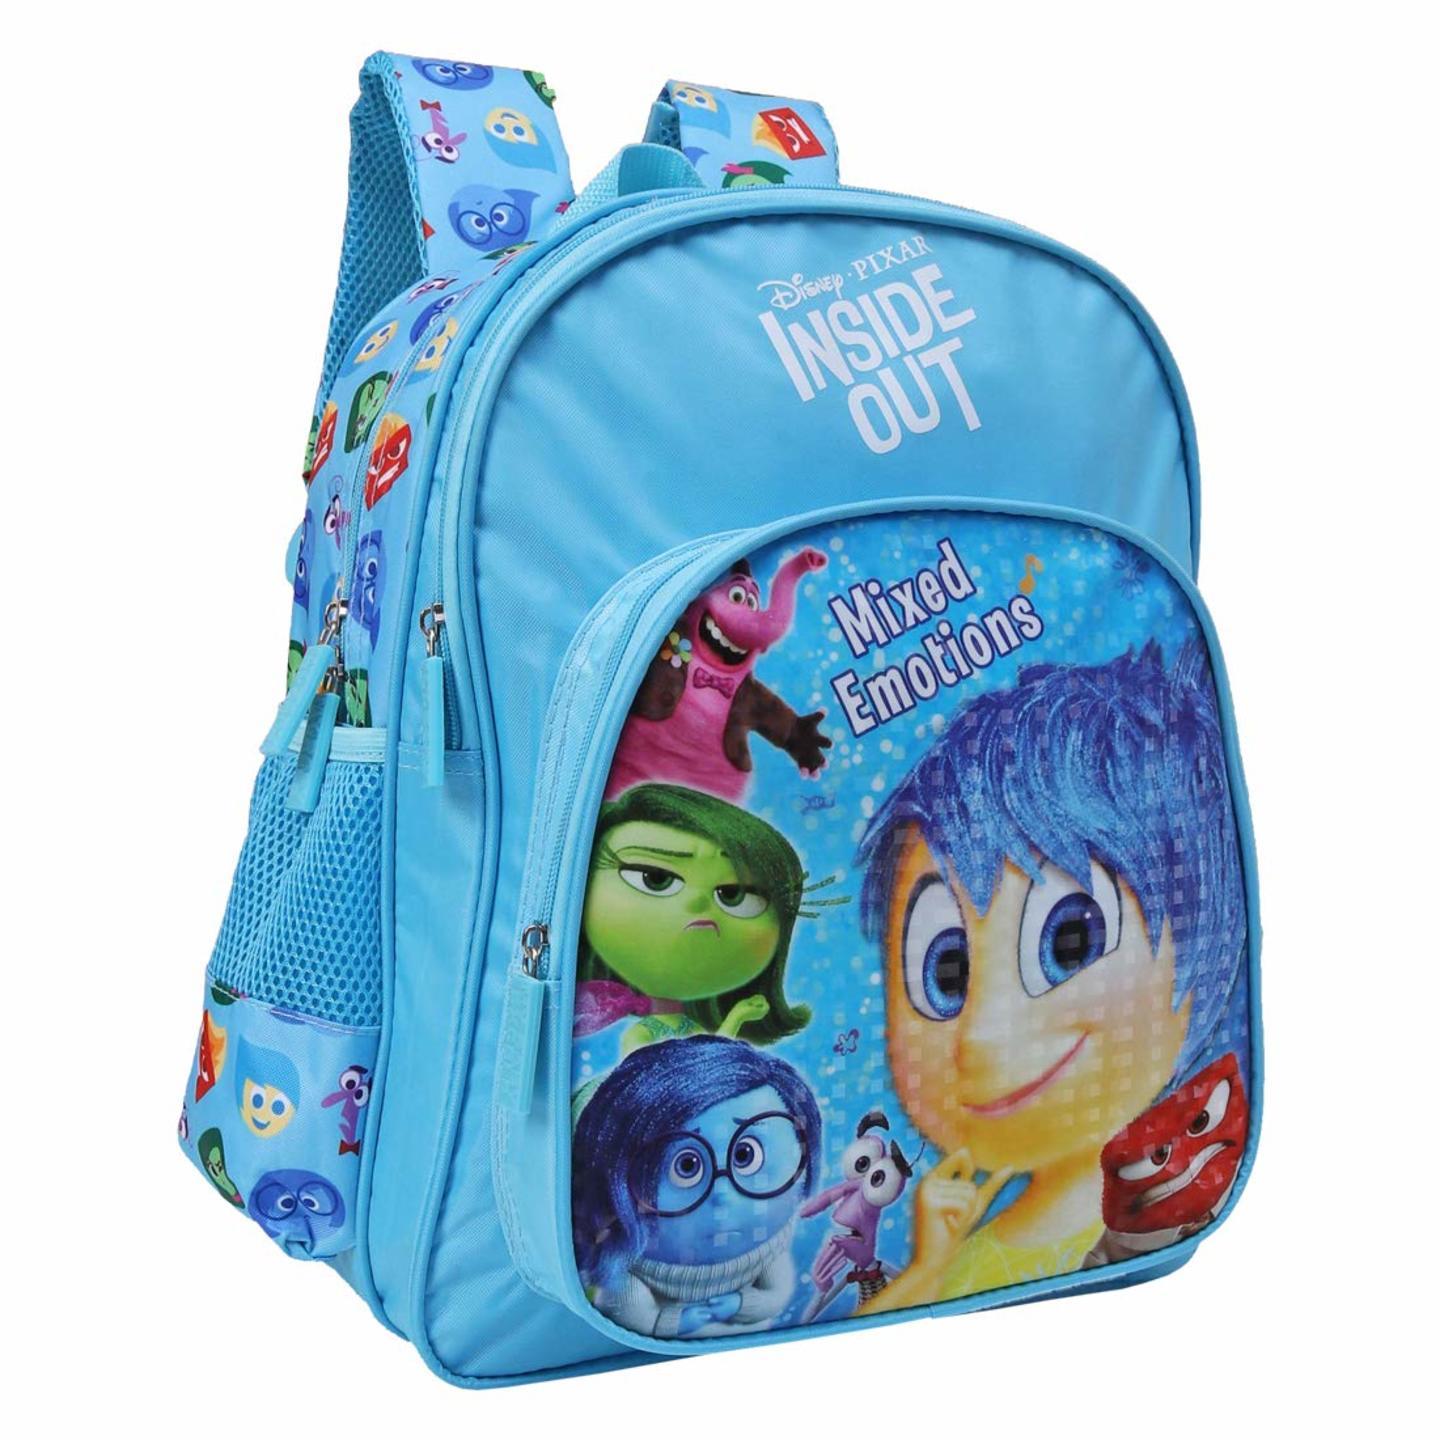 Inside Out School Backpack (MBE-WDP1375) - 41 x 30 cm